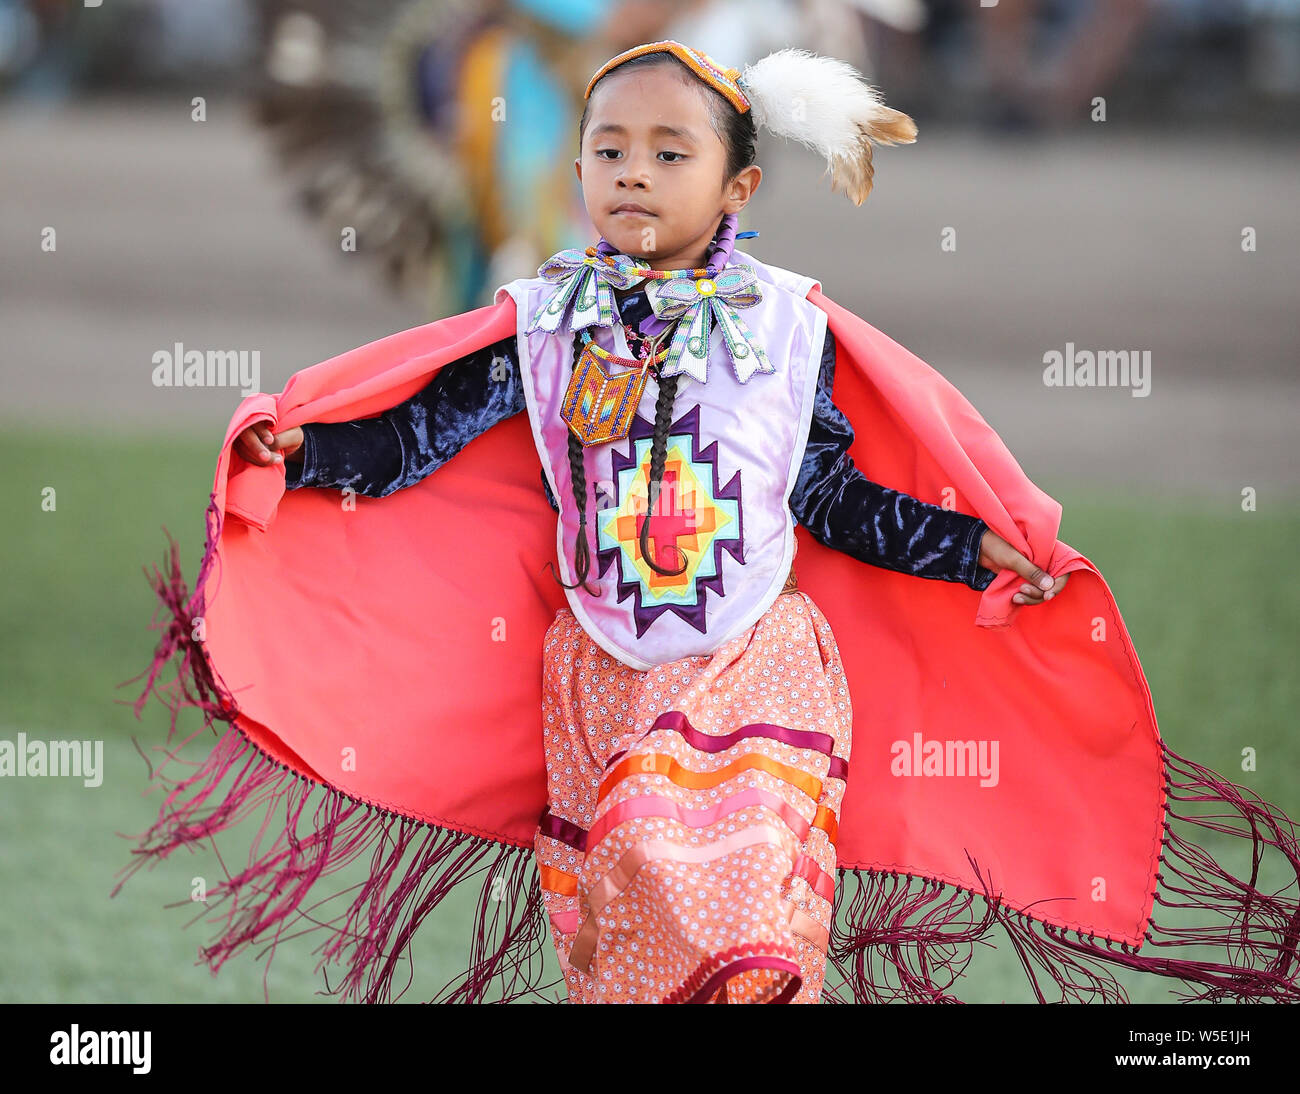 Dancers perform during the Grand Entry of the Julyamsh Pow Wow in Coeur